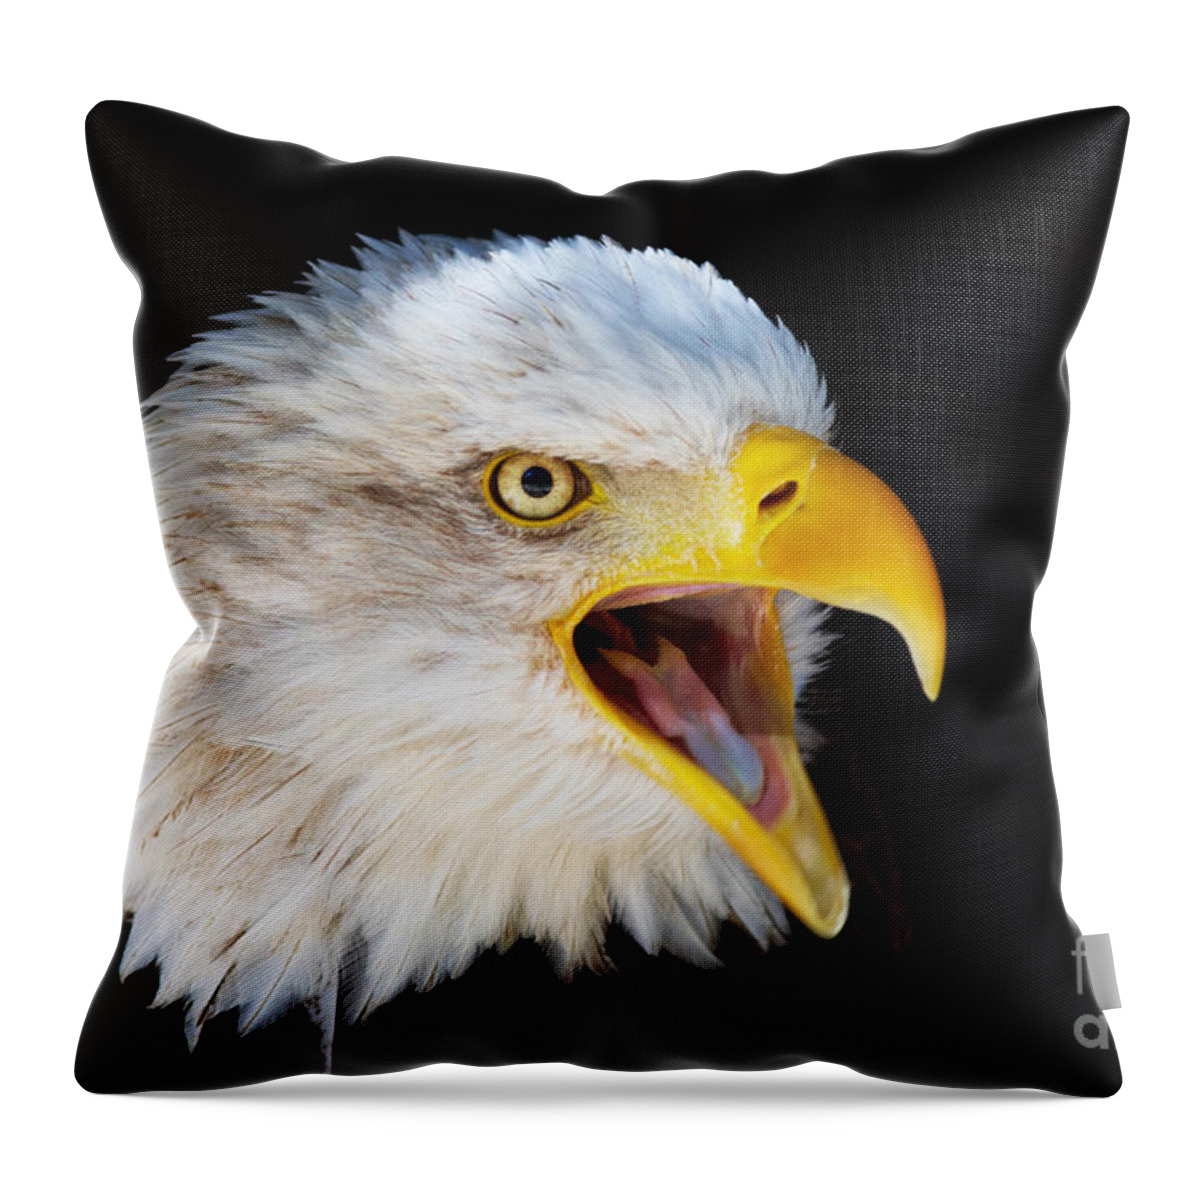 Alaska Throw Pillow featuring the photograph Closeup portrait of a screaming American Bald Eagle by Nick Biemans